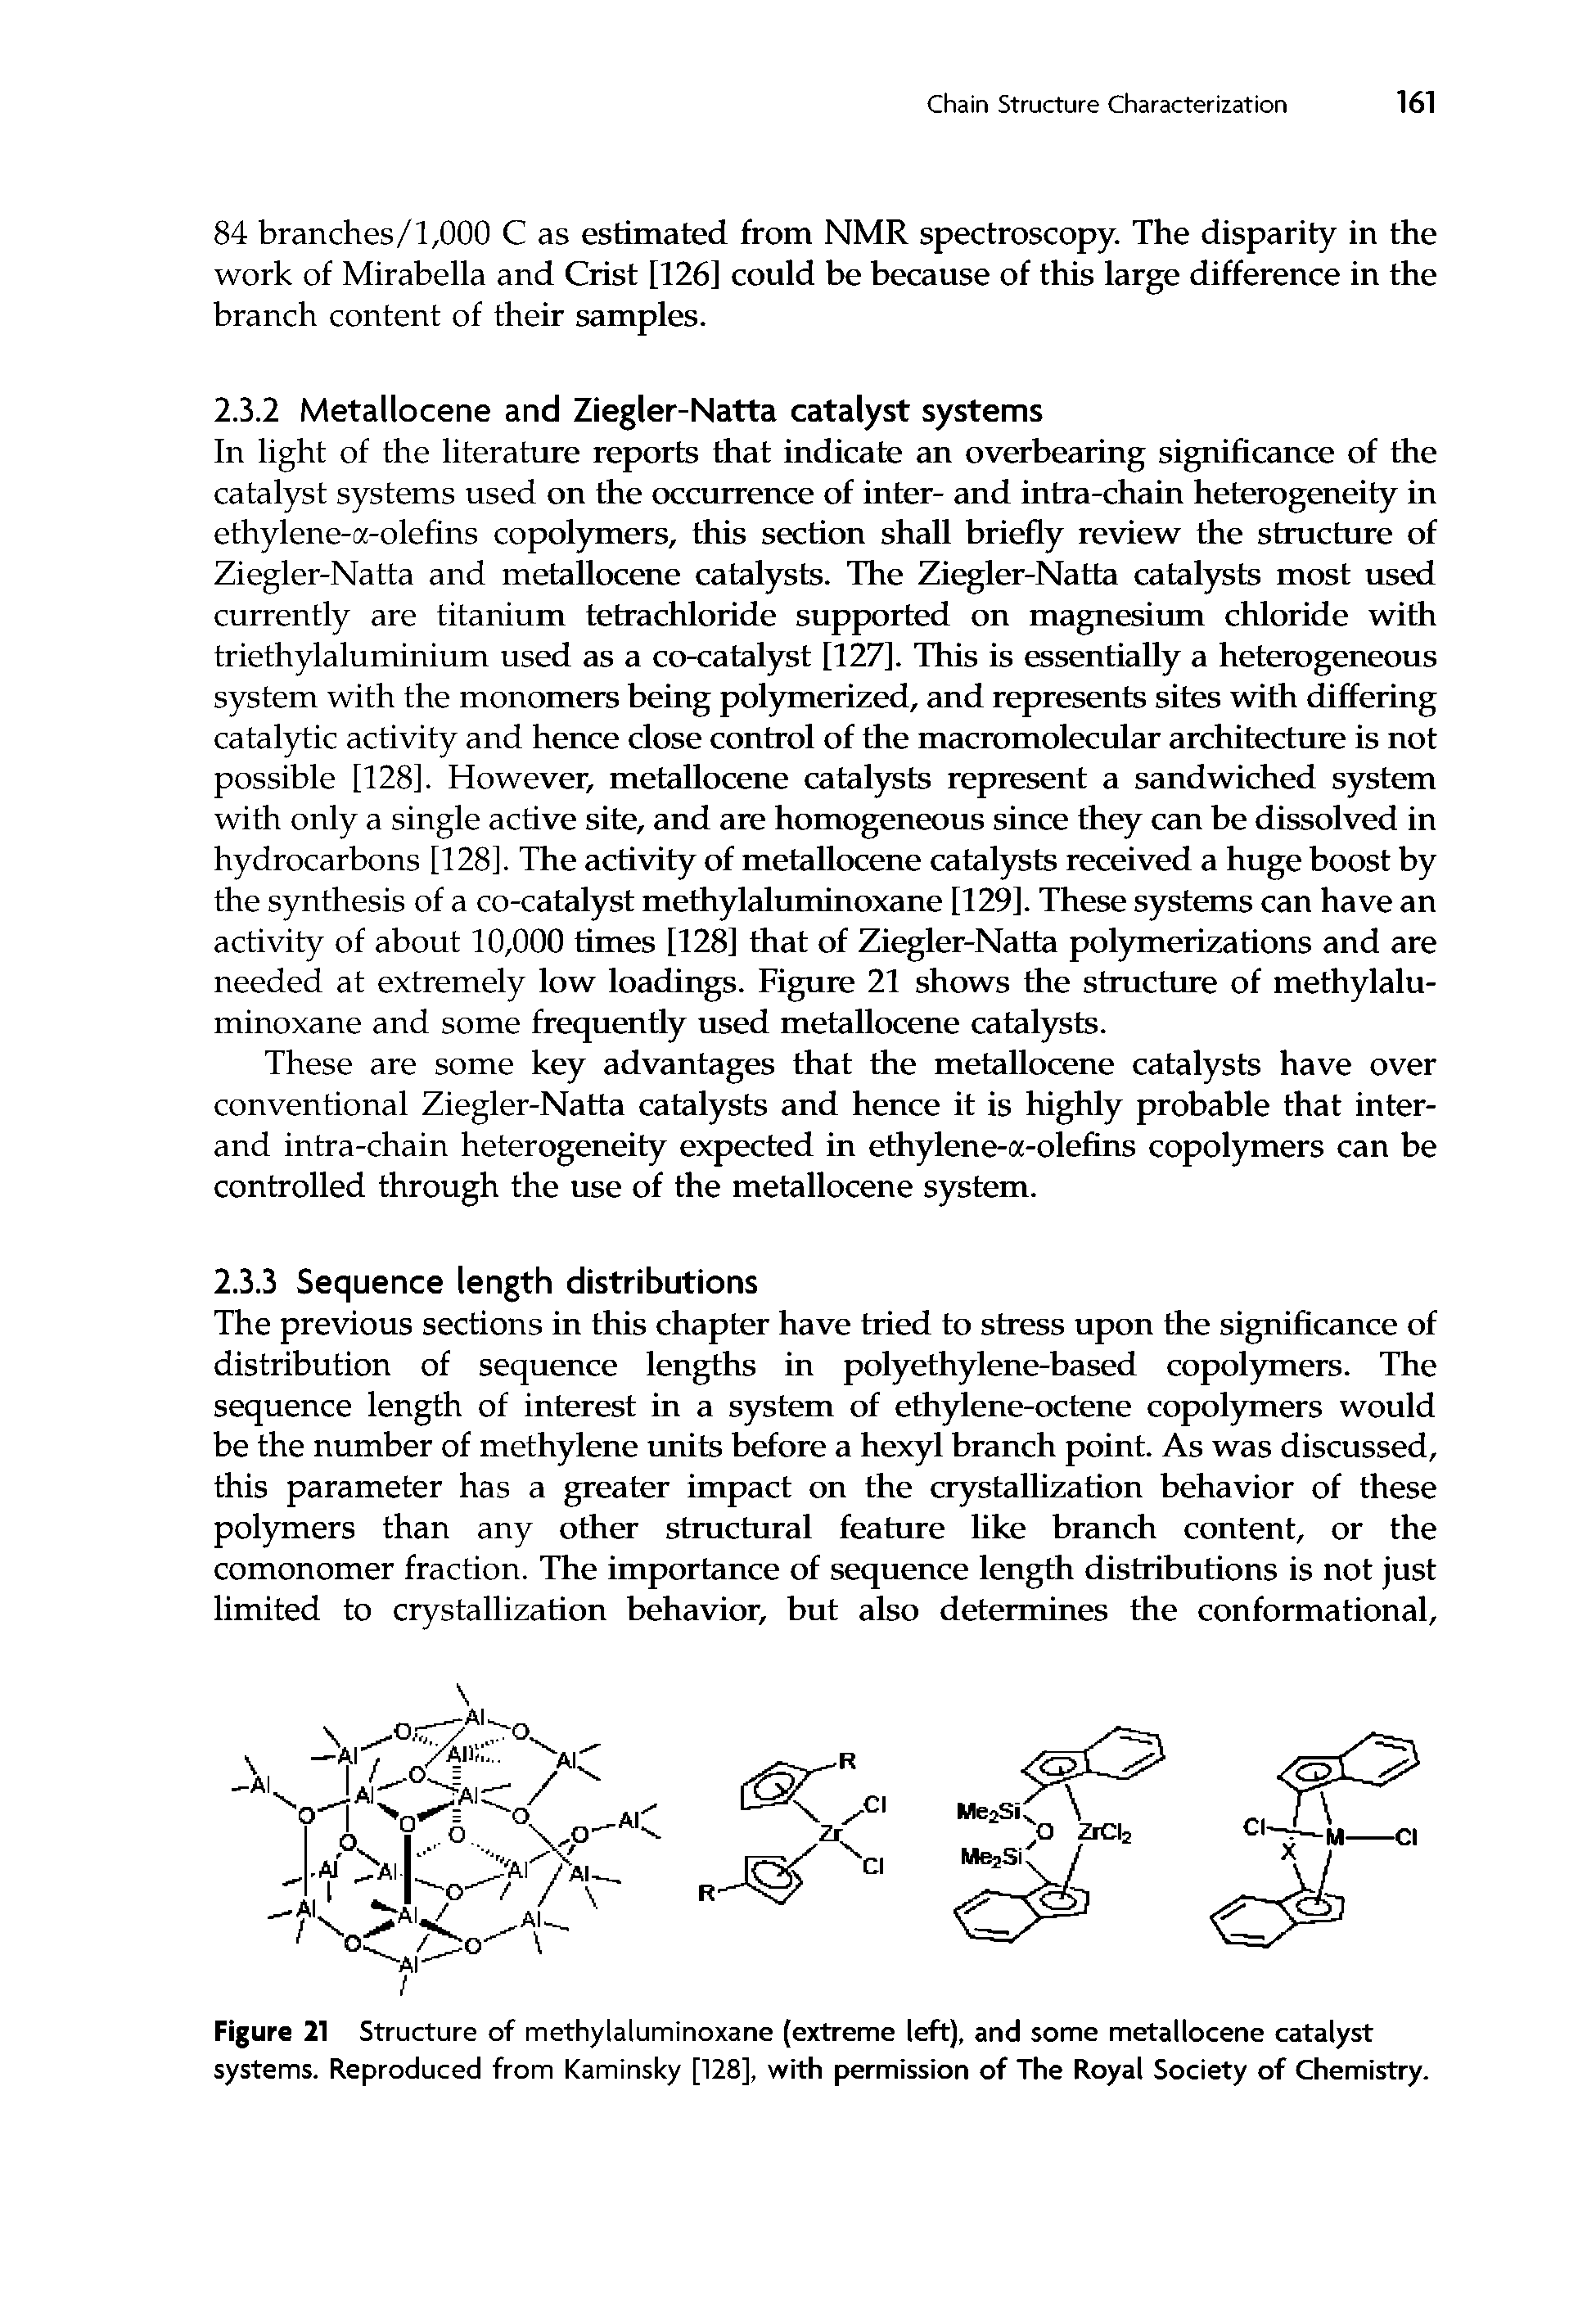 Figure 21 Structure of methylaluminoxane (extreme left), and some metallocene catalyst systems. Reproduced from Kaminsky [128], with permission of The Royal Society of Chemistry.